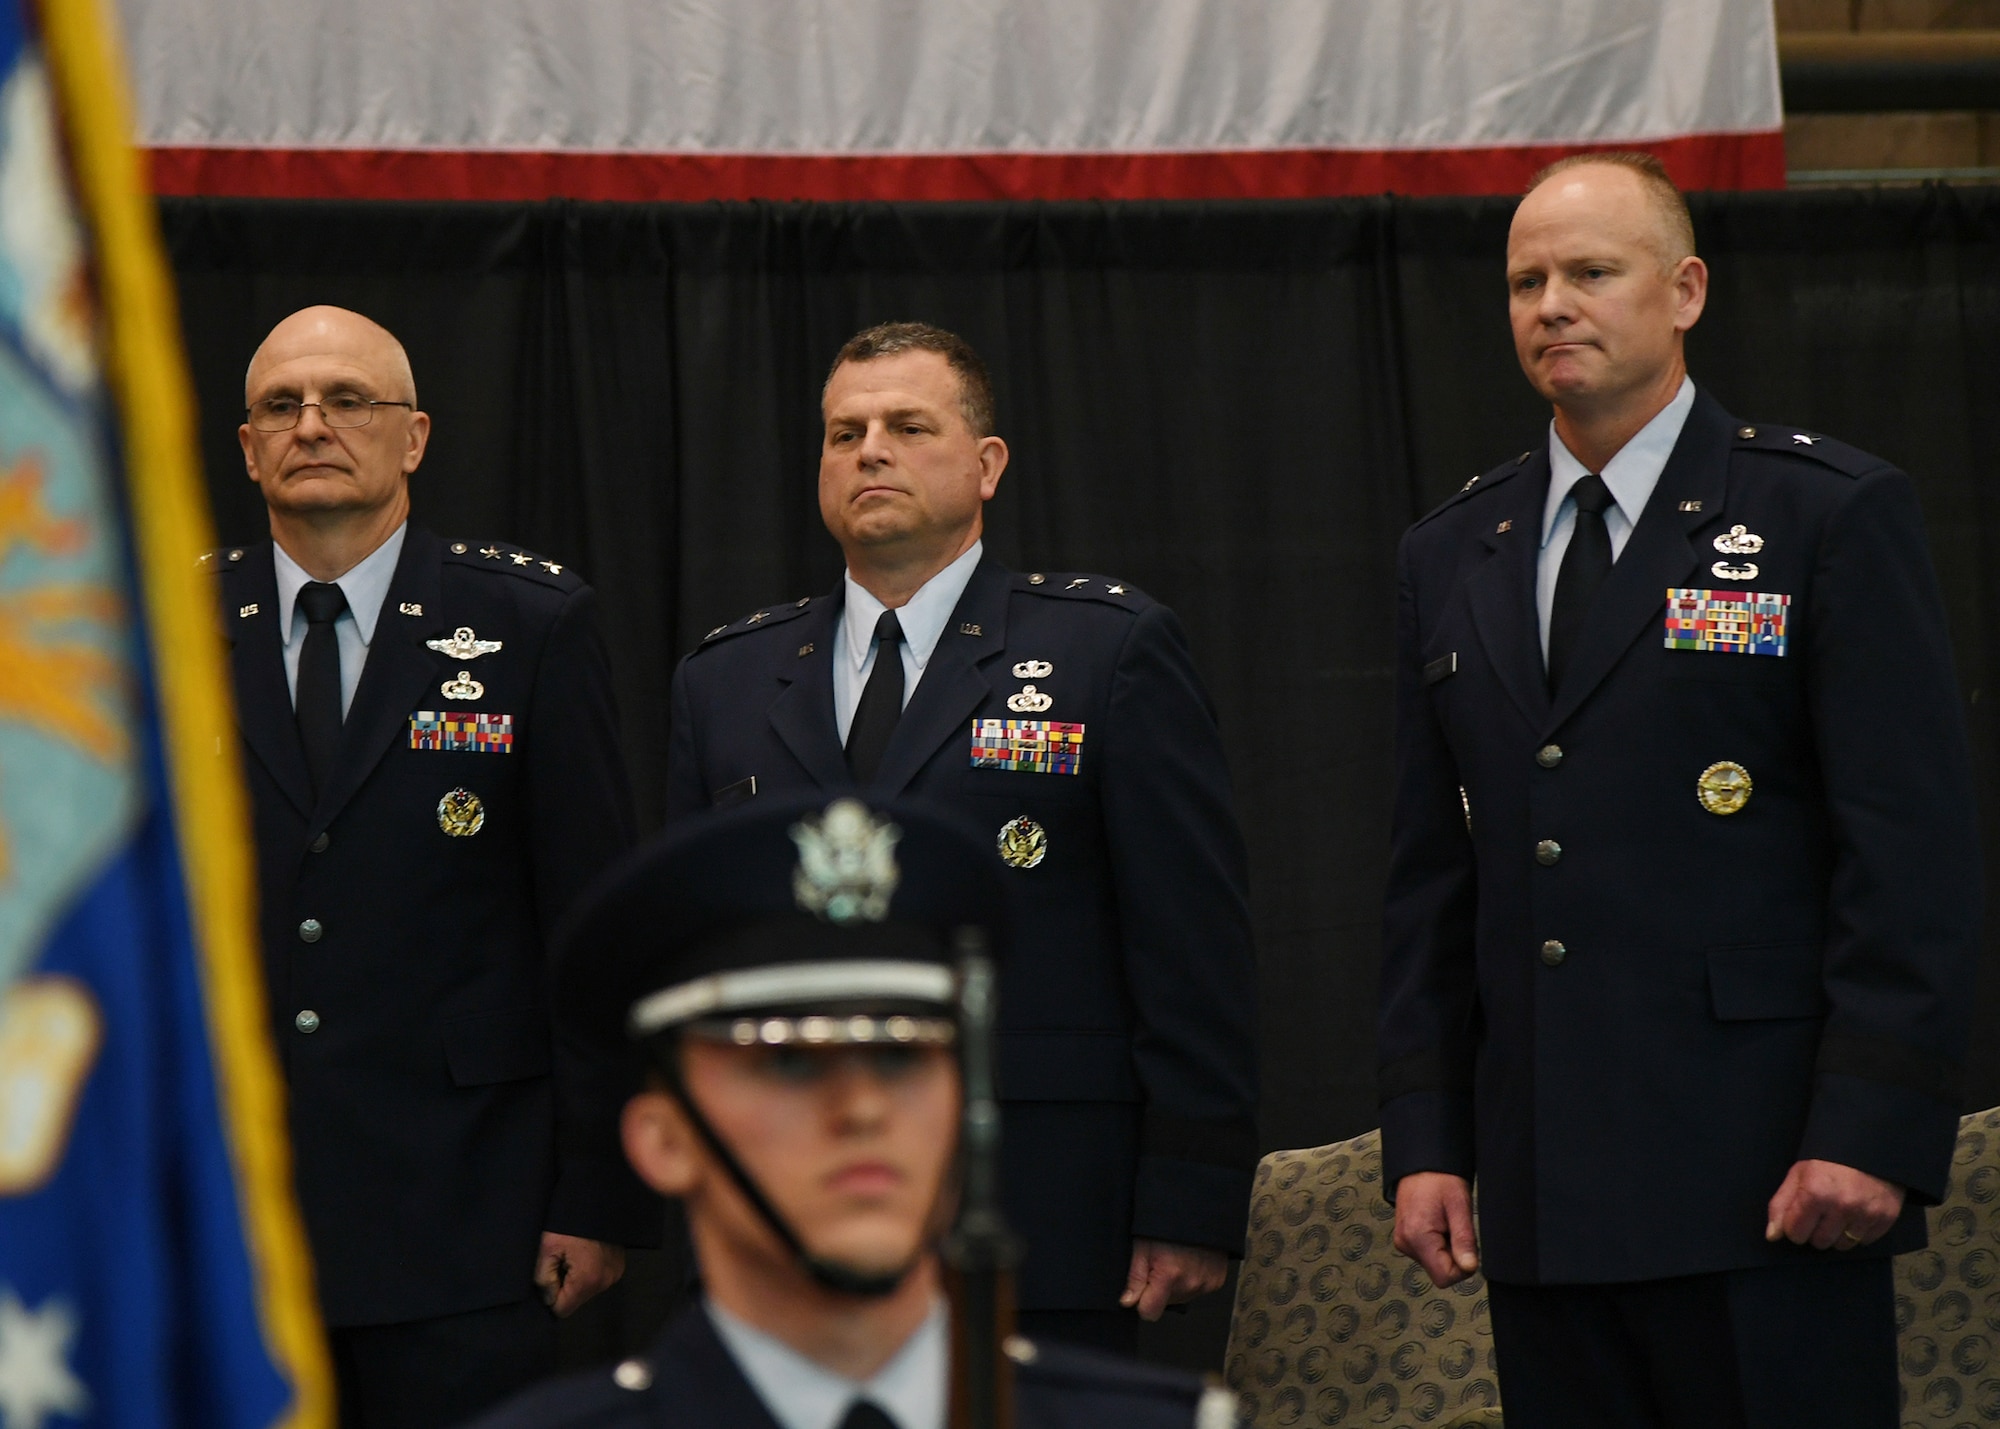 Brig. Gen. Michael Schmidt, right, takes leadership of the Command, Control, Communications, Intelligence and Networks directorate at Hanscom Air Force Base, Mass., April 13, 2018 from Maj. Gen. Dwyer Dennis, center, who is retiring, during a ceremony at hosted by Lt. Gen. Arnold Bunch, left, military deputy of the Office of Assistant Secretary of Air Force for Acquisition at the Pentagon. The change of leadership ceremony was held at the Hanscom Aero Club hangar.  (U.S. Air Force Photo by Linda LaBonte Britt)